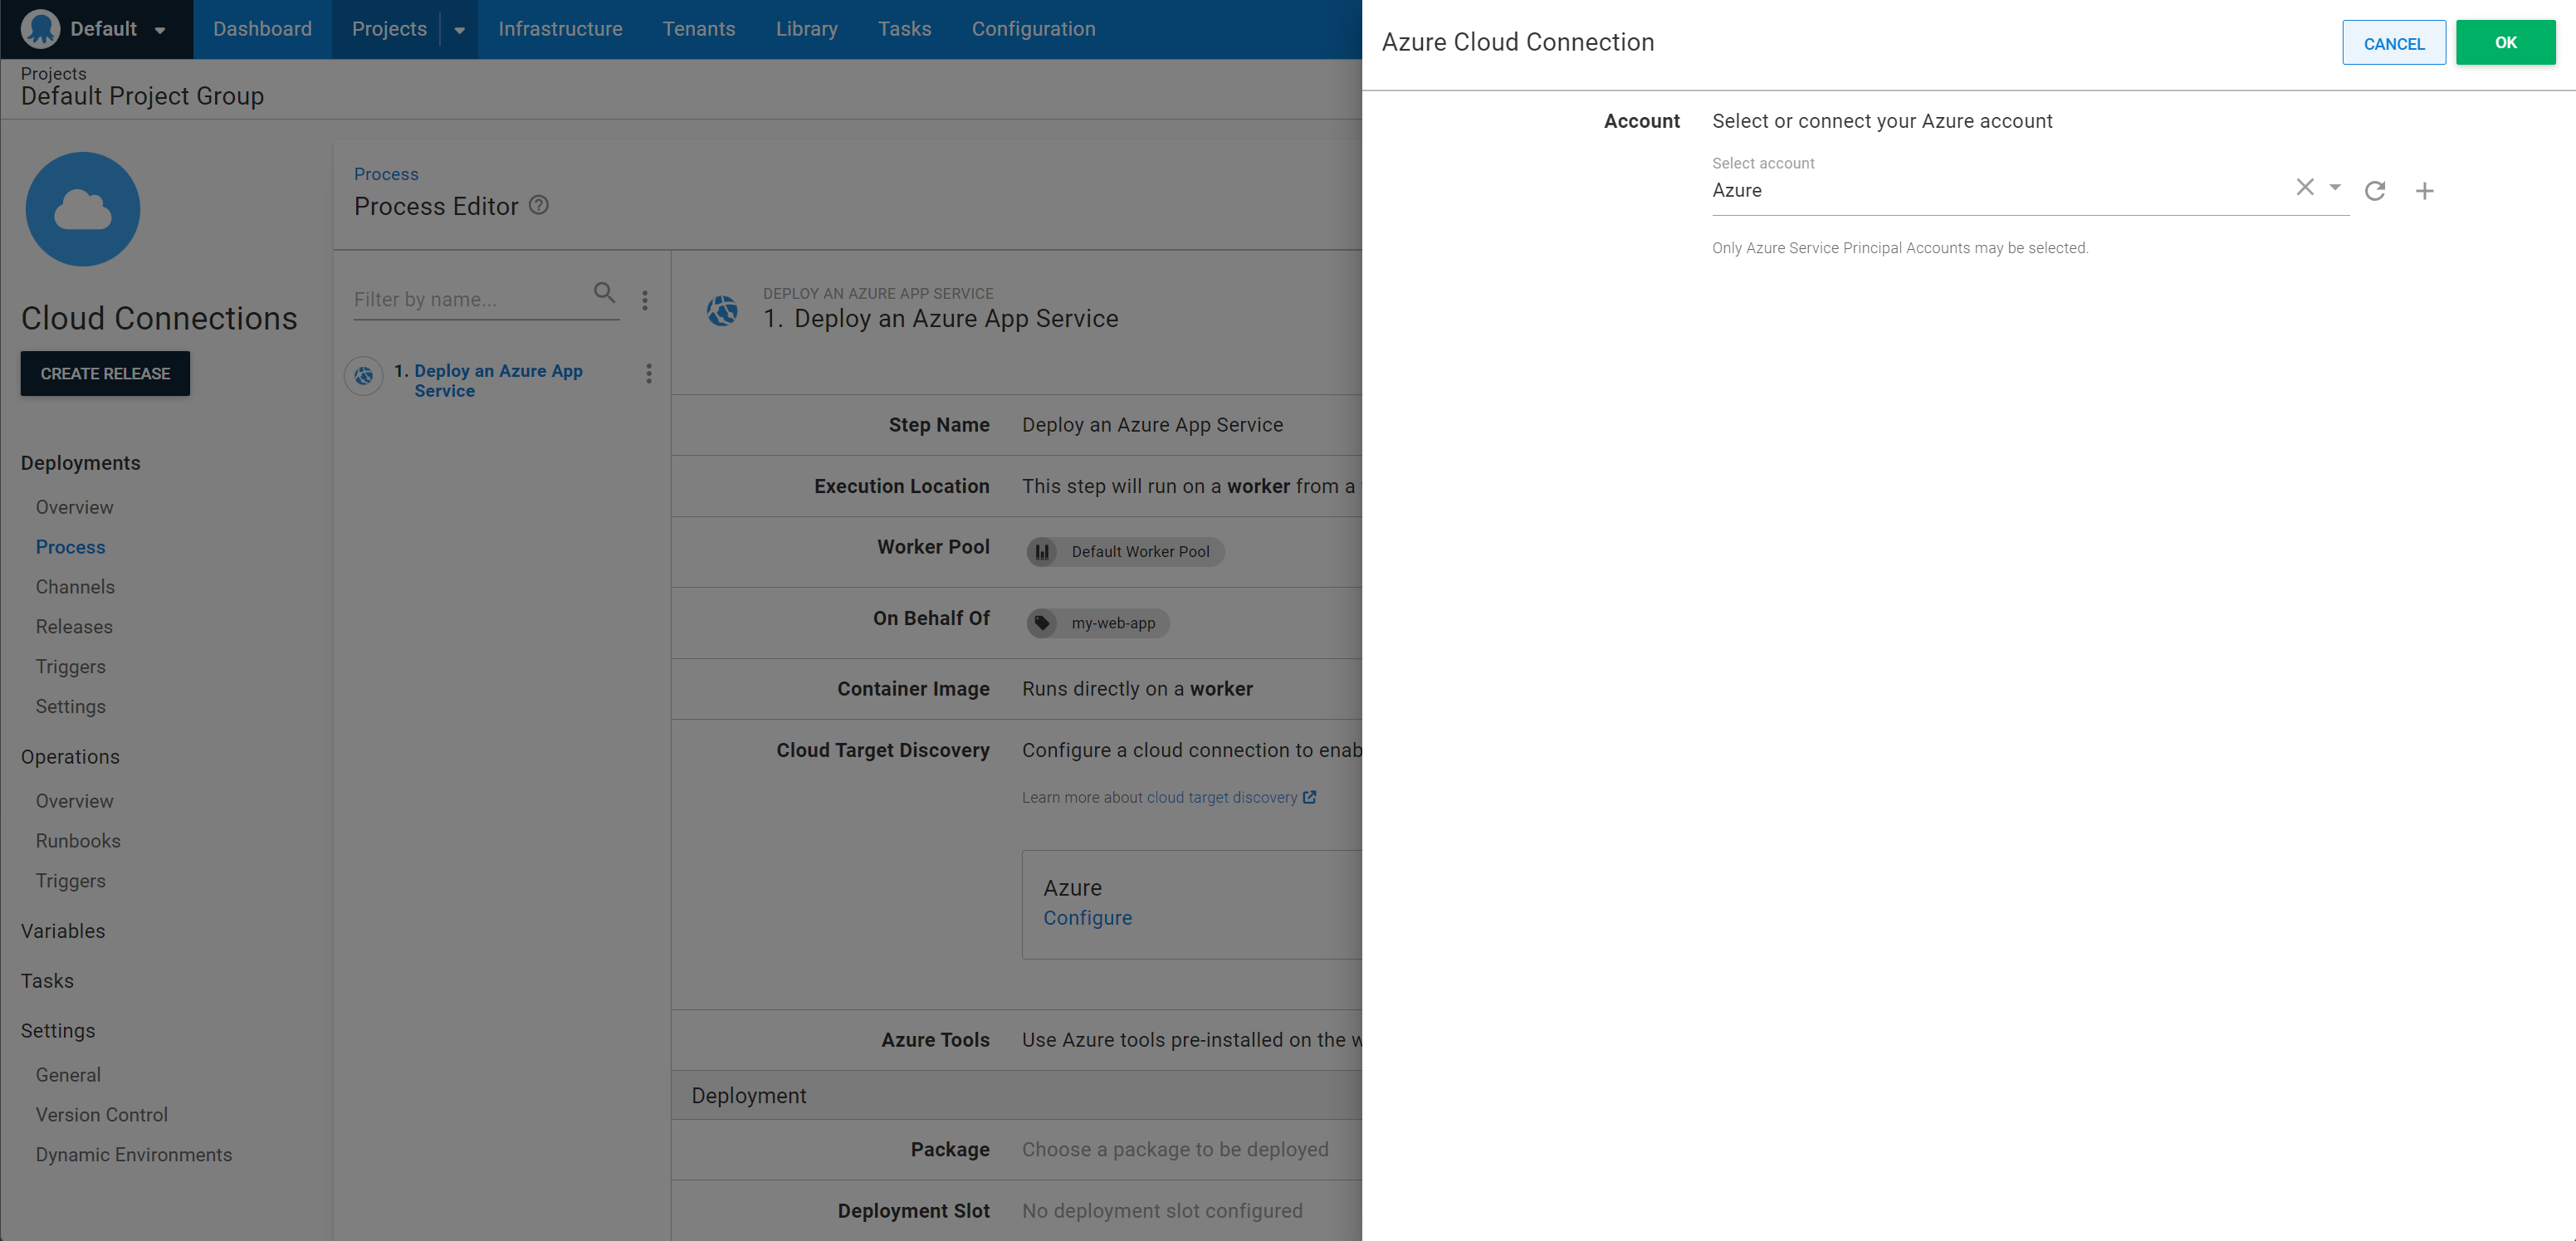 Configuring Cloud Connections for an Azure step